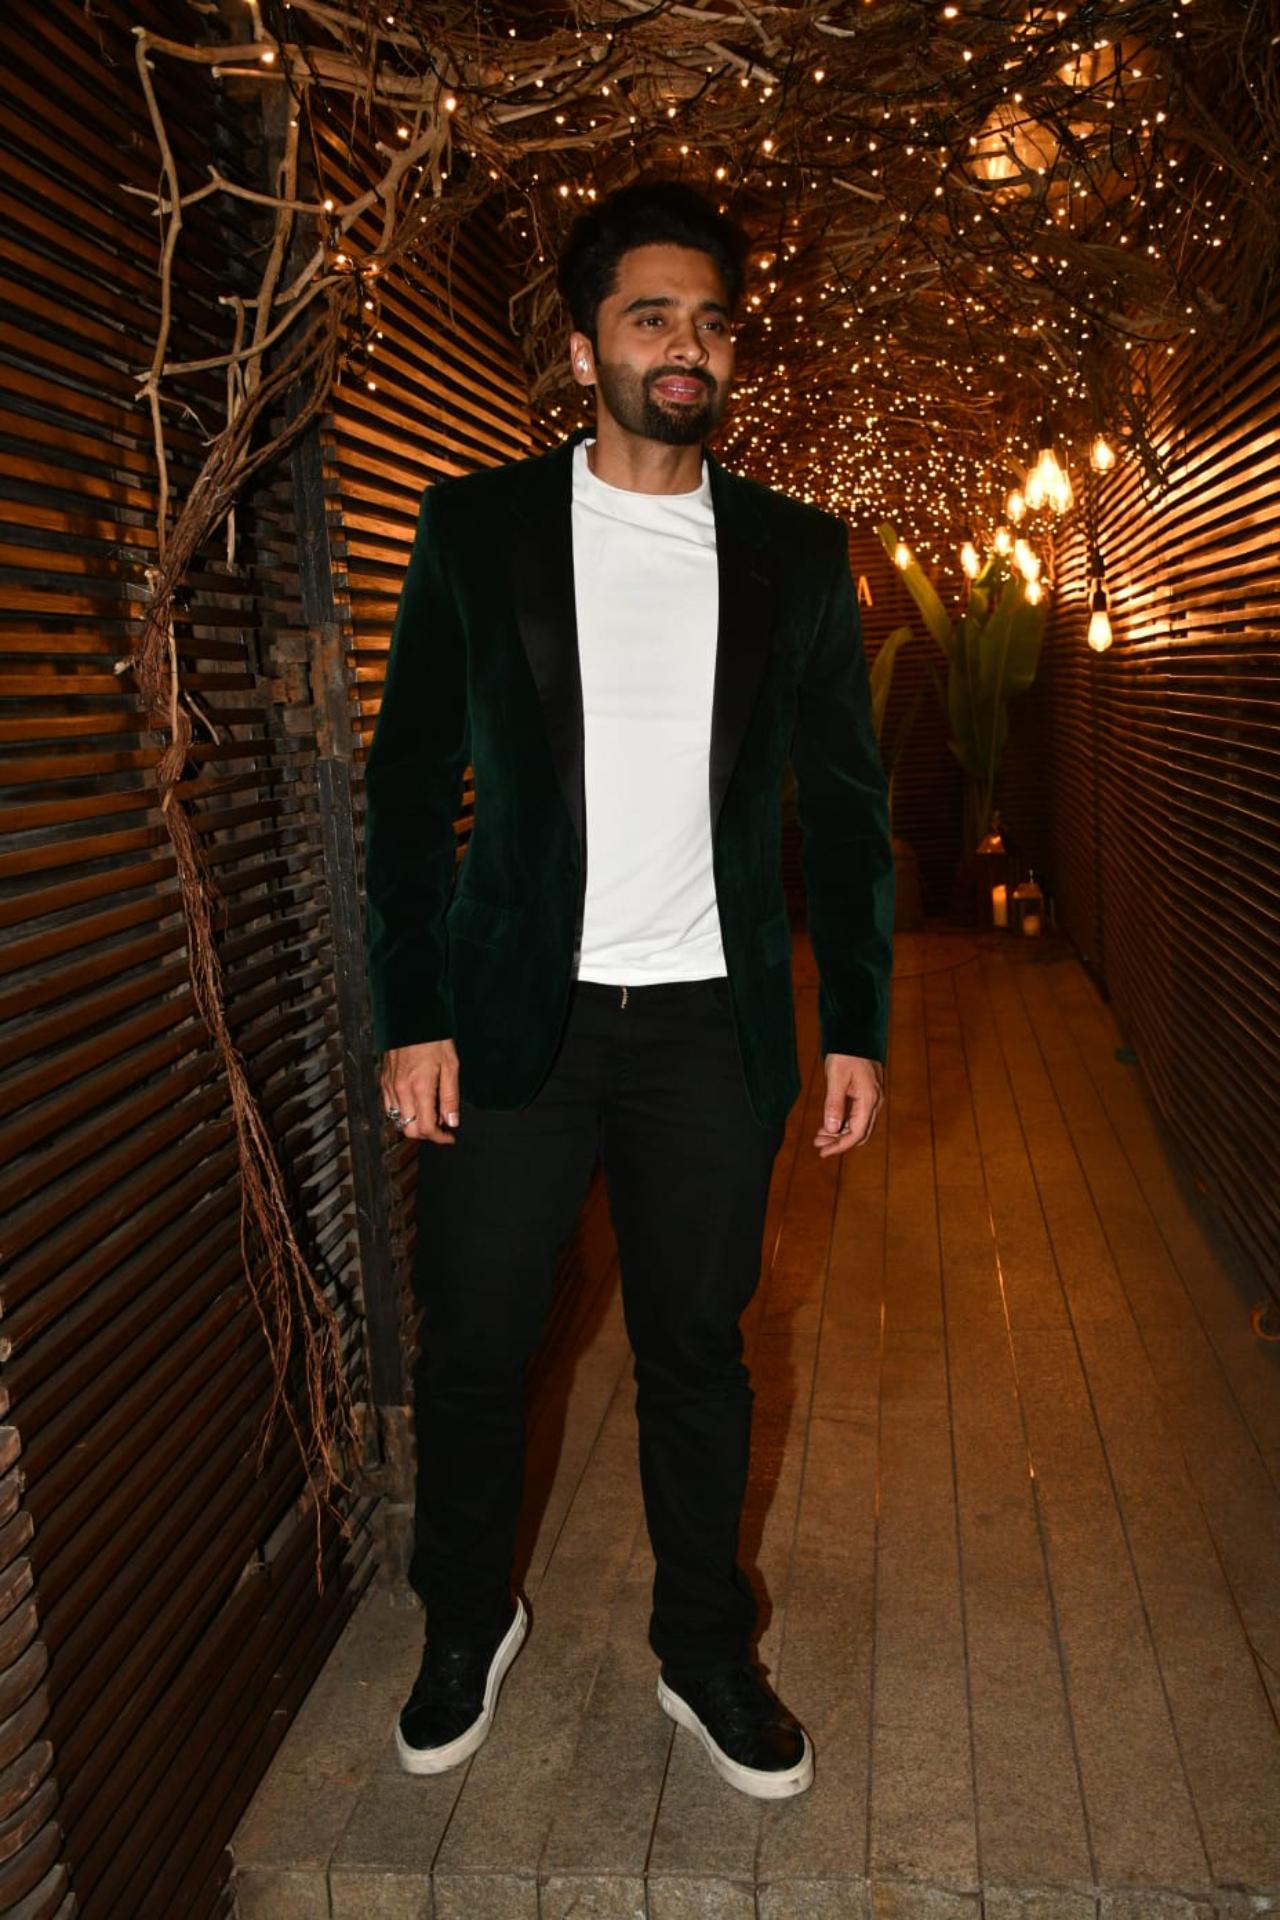 Jackky Bhagnani who is enjoying a successful run of films backed by his production was seen posing in a black and white suit for the bash. Bhagnani, who is usually spotted with actress girlfriend Rakul Preet Singh at parties, was seen arriving solo. Rakul is currently shooting in the Northern part of India with Arjun Kapoor for her upcoming film